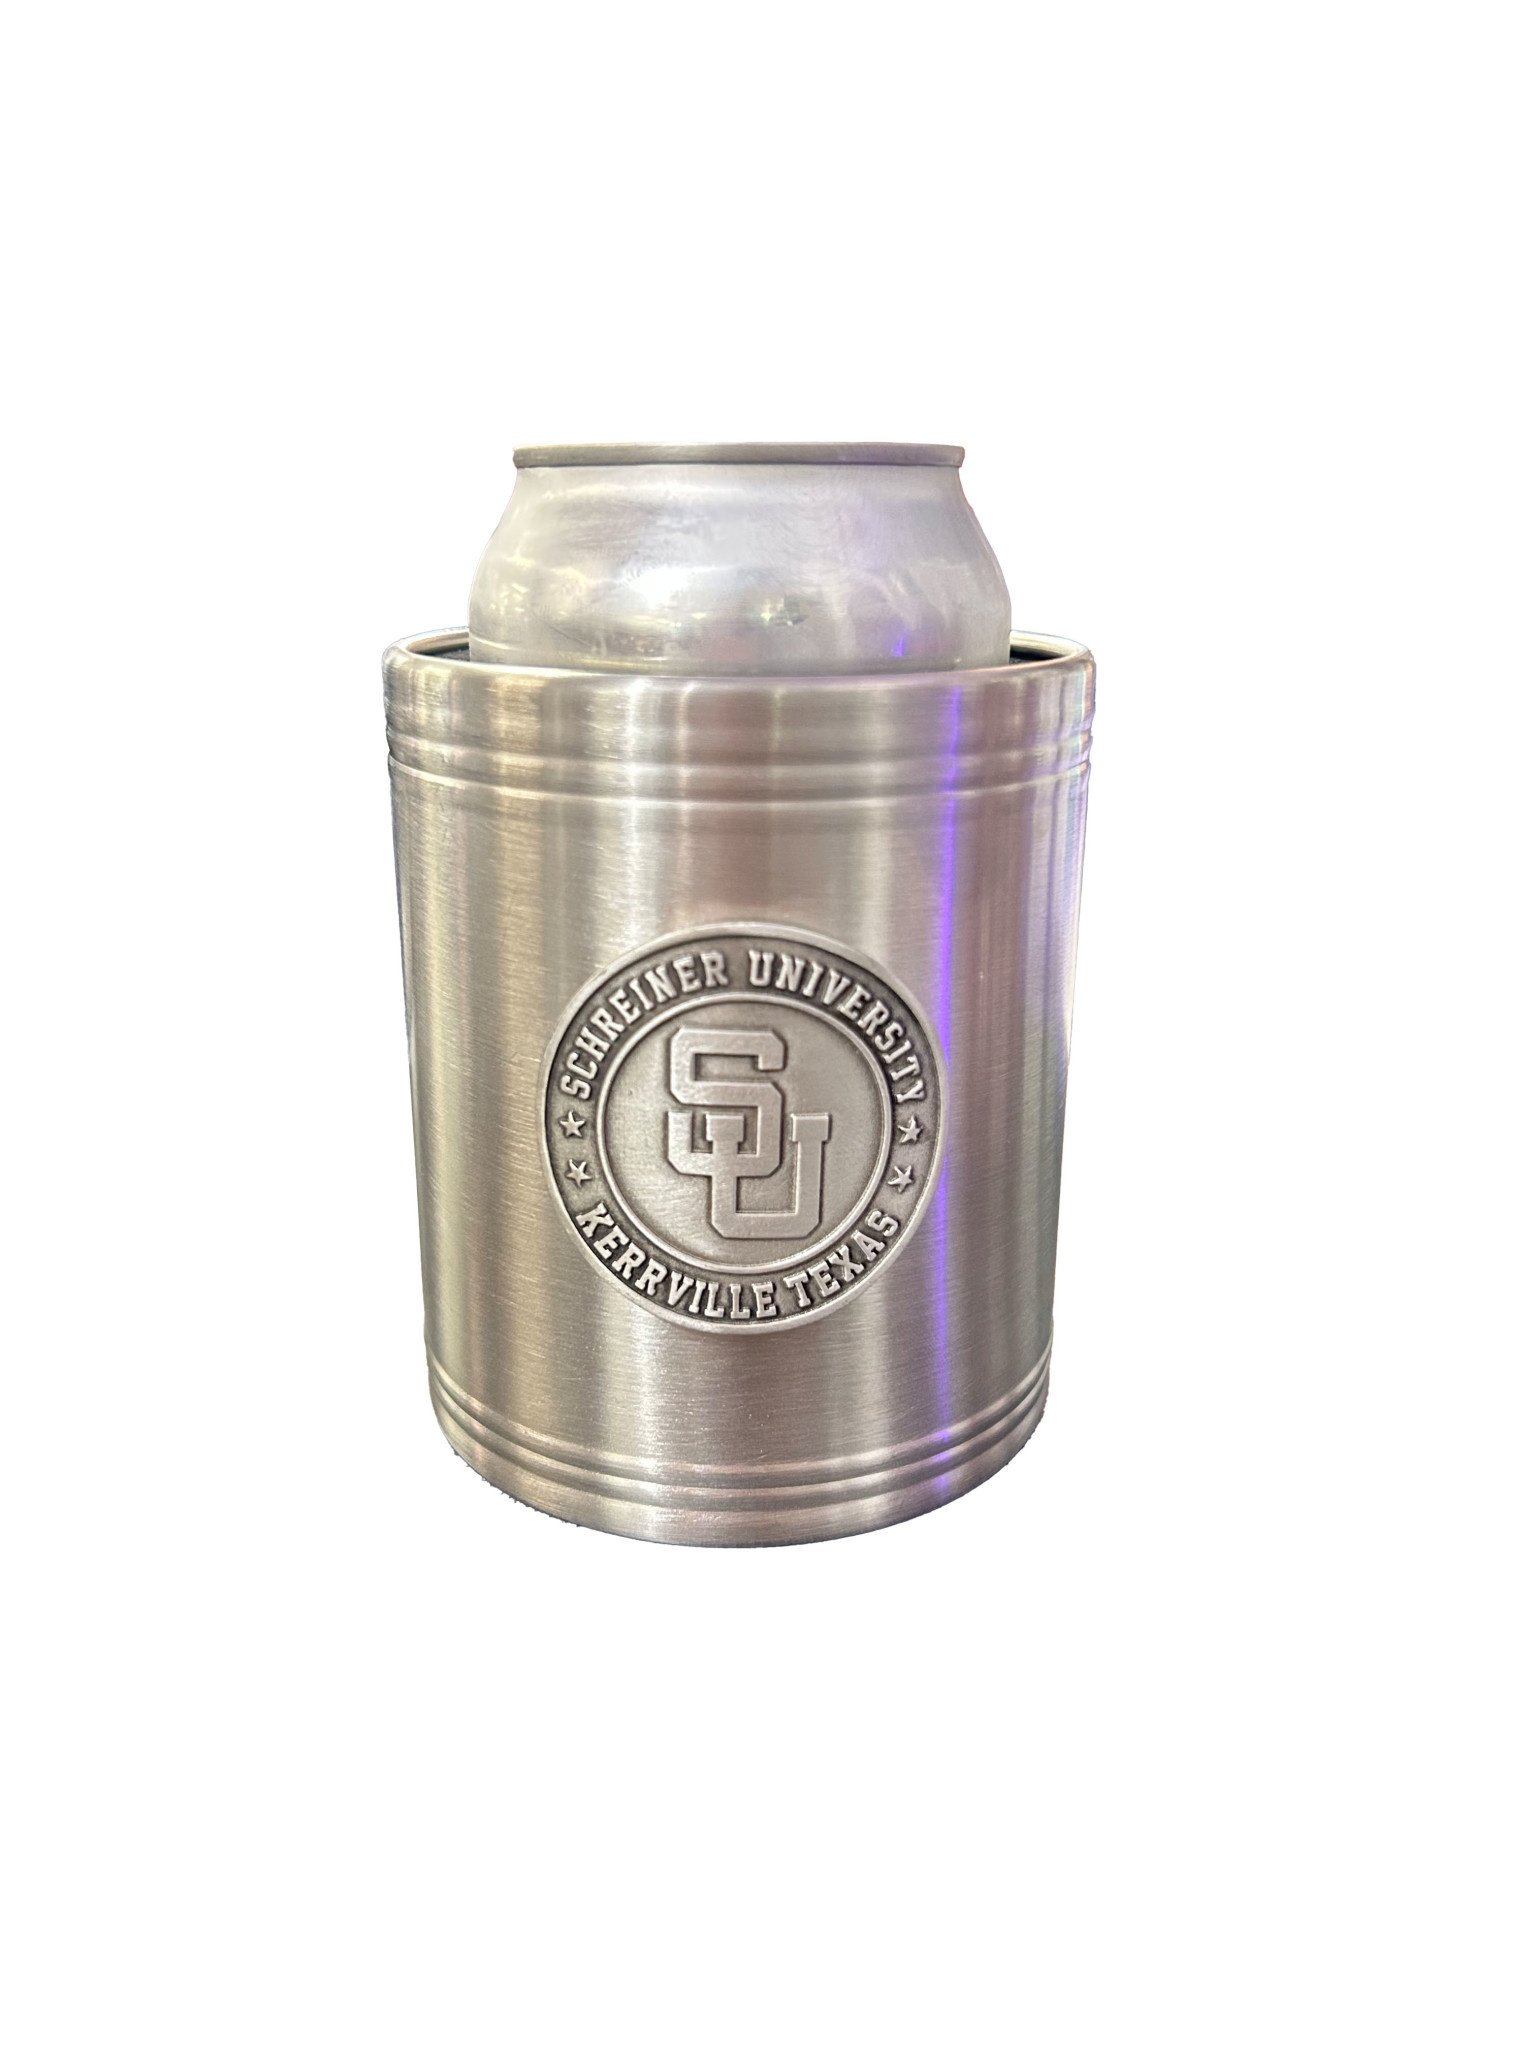 Jardine Stainless Steal Steel Can Koozie - Wingate Outfitters